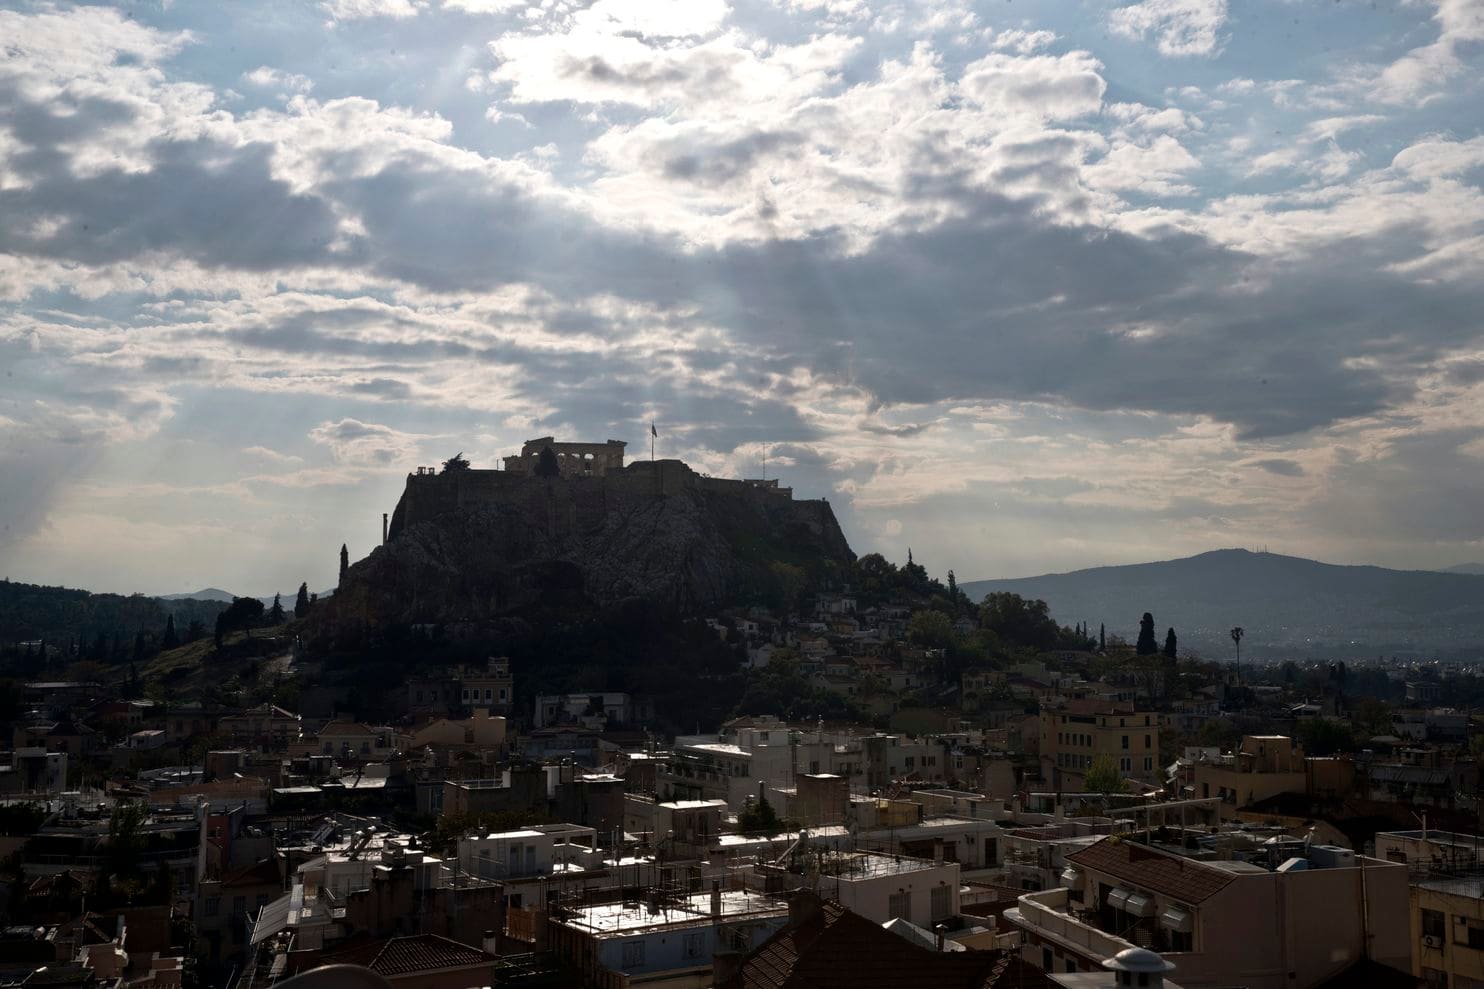 Lightning hits Acropolis in Greece injuring 4, site intact